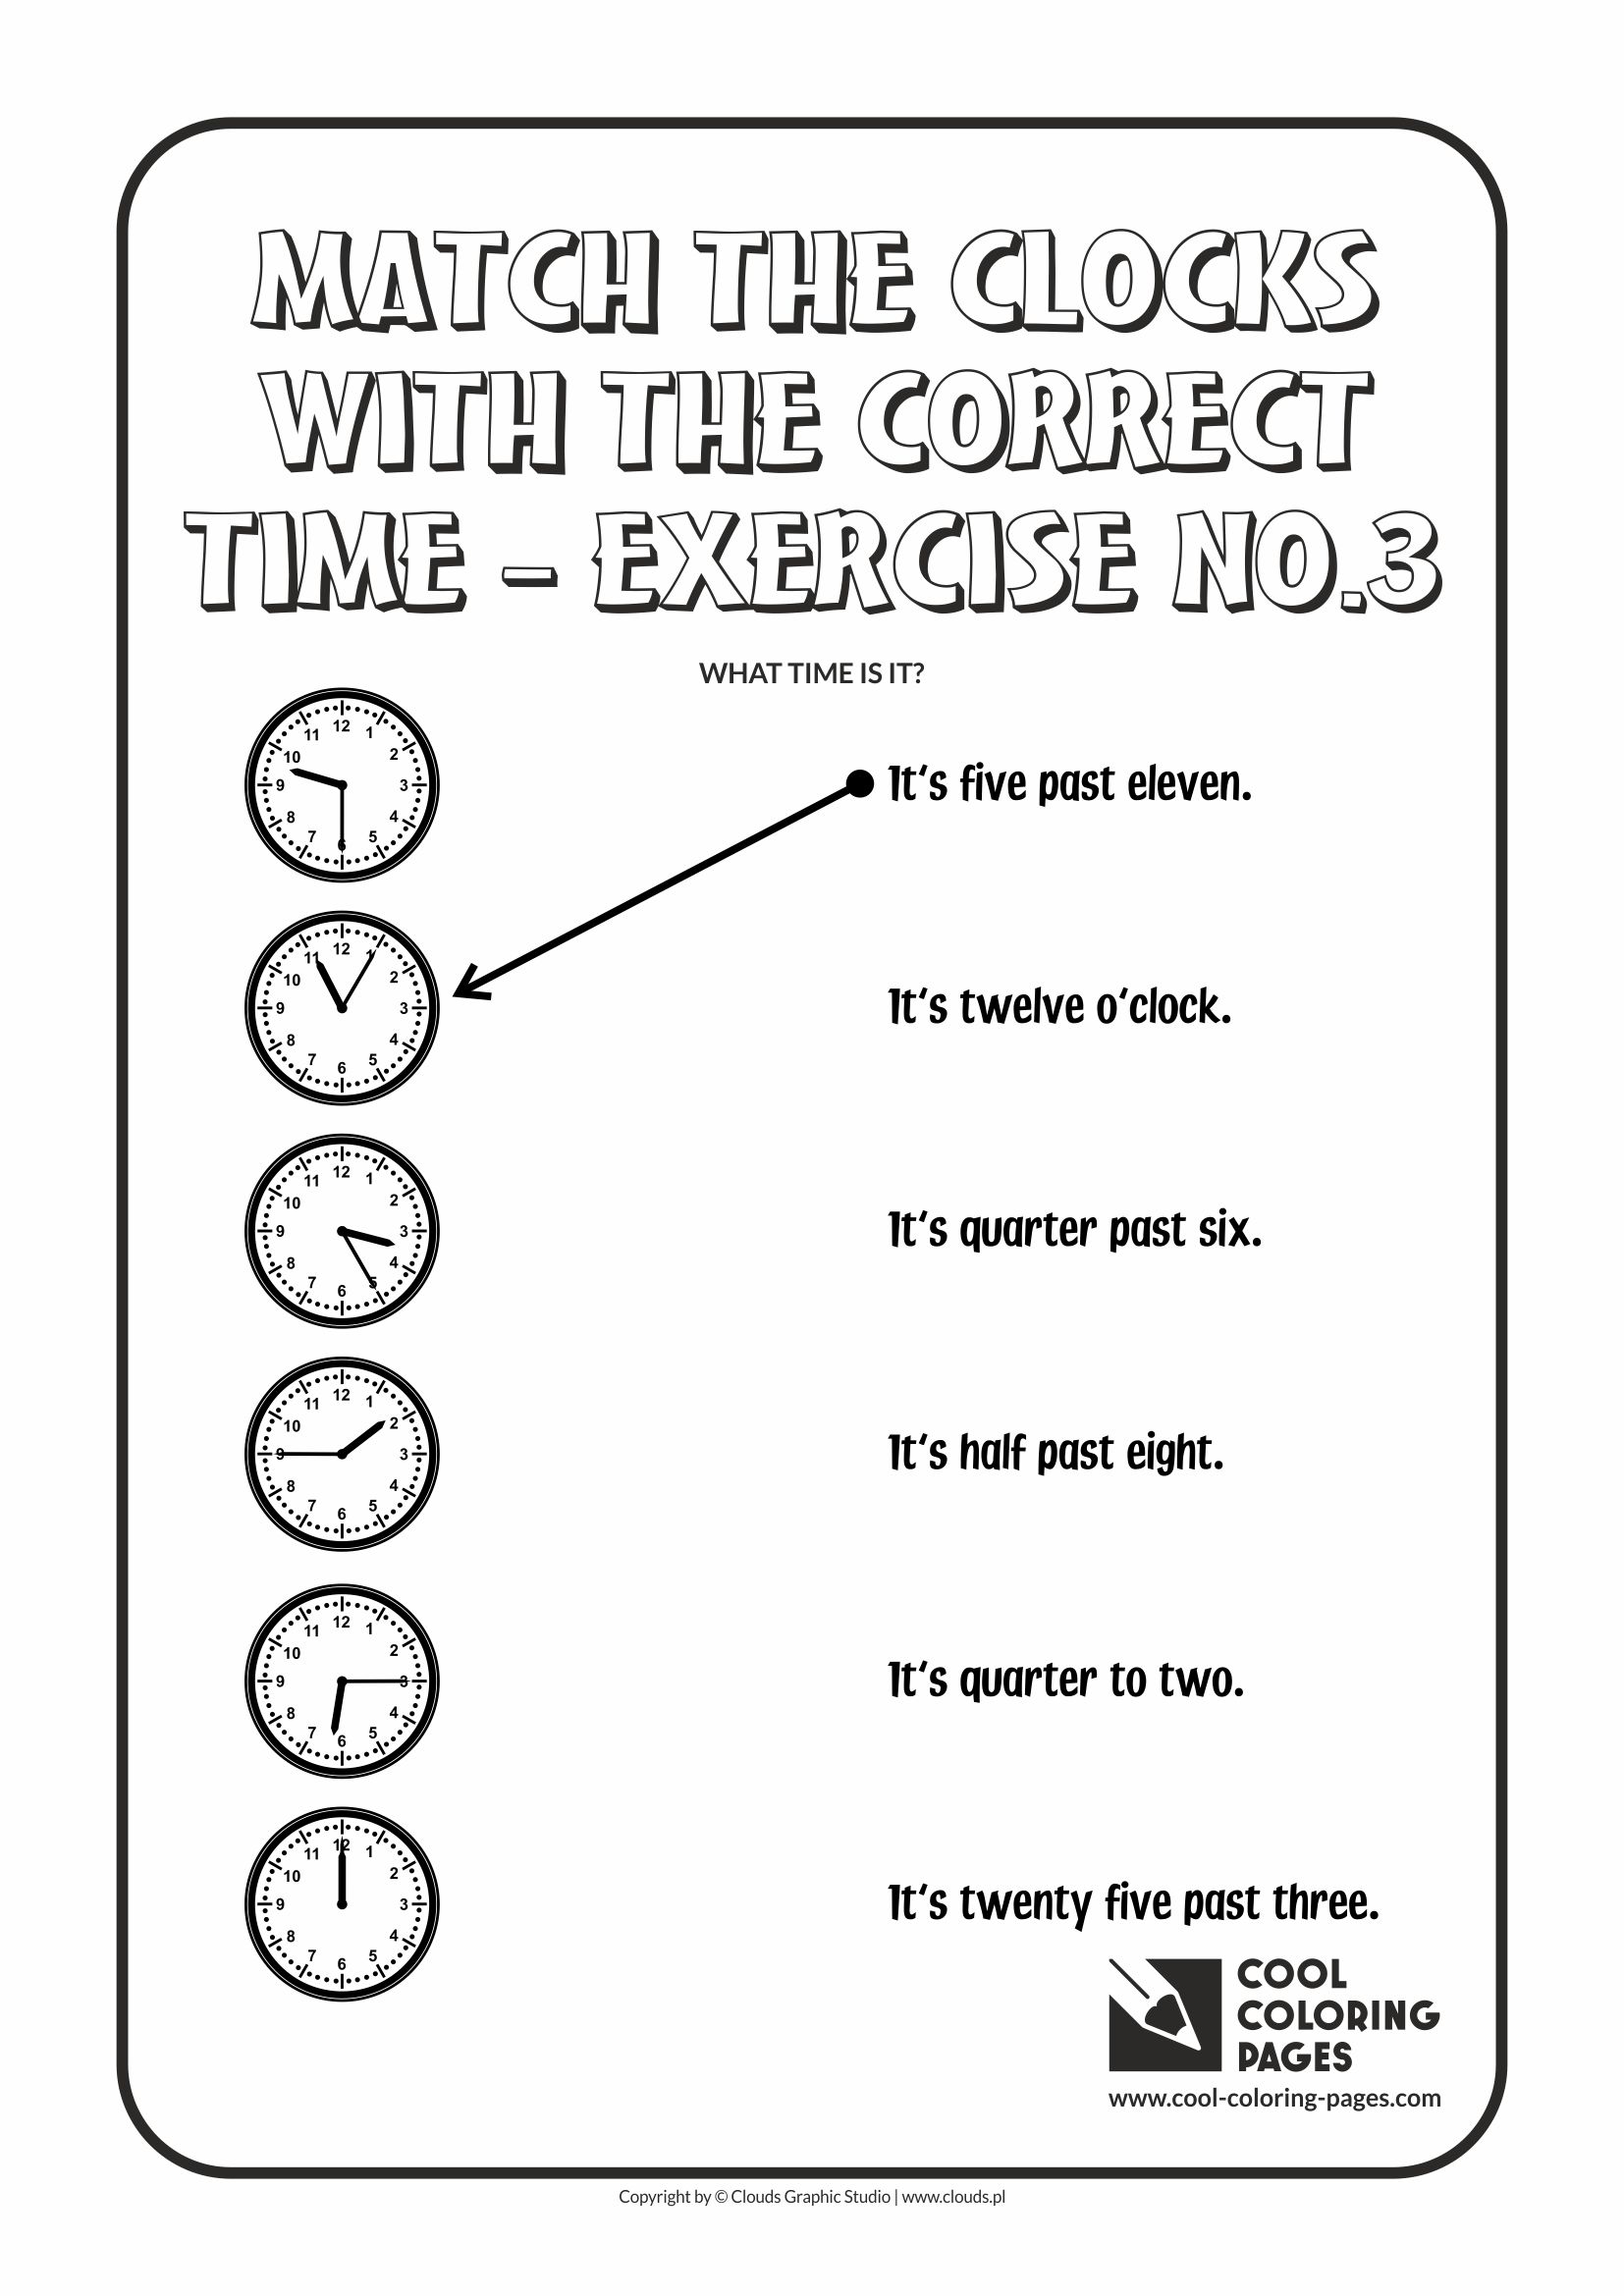 Cool Coloring Pages - Time / Match the clocks with the correct time no.3